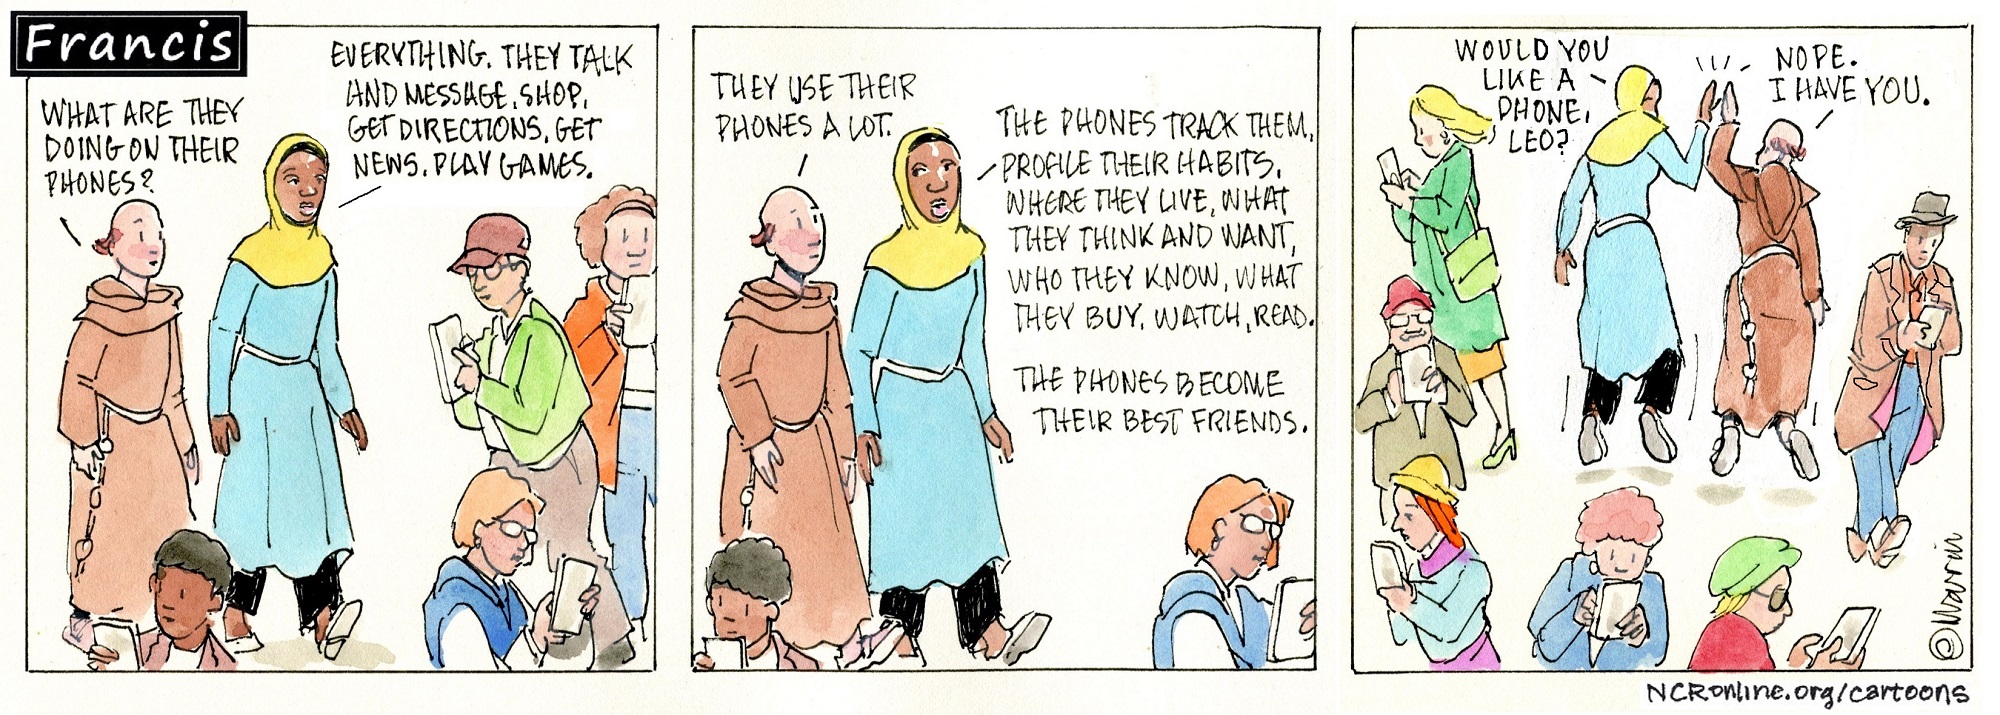 Francis, the comic strip: What is everybody doing on their phones?